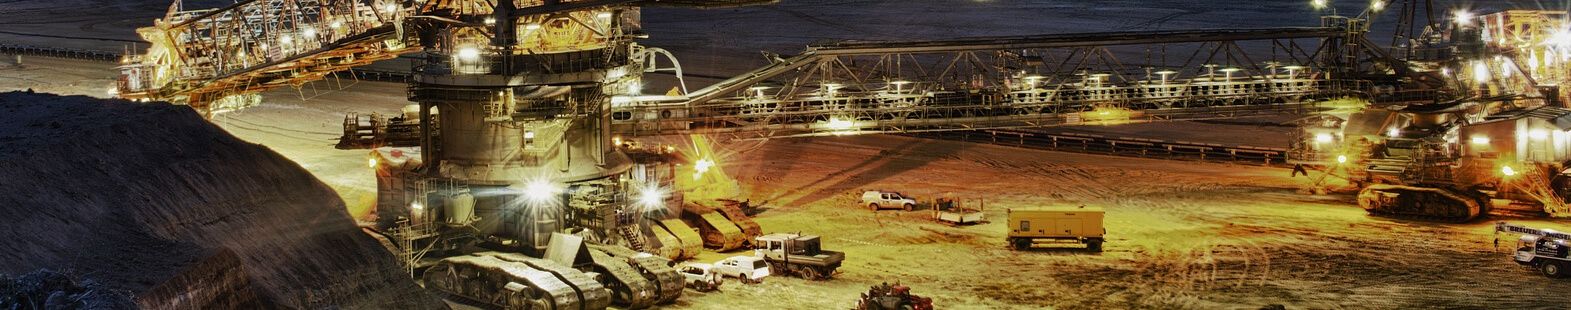 Open pit mine at night with excavators